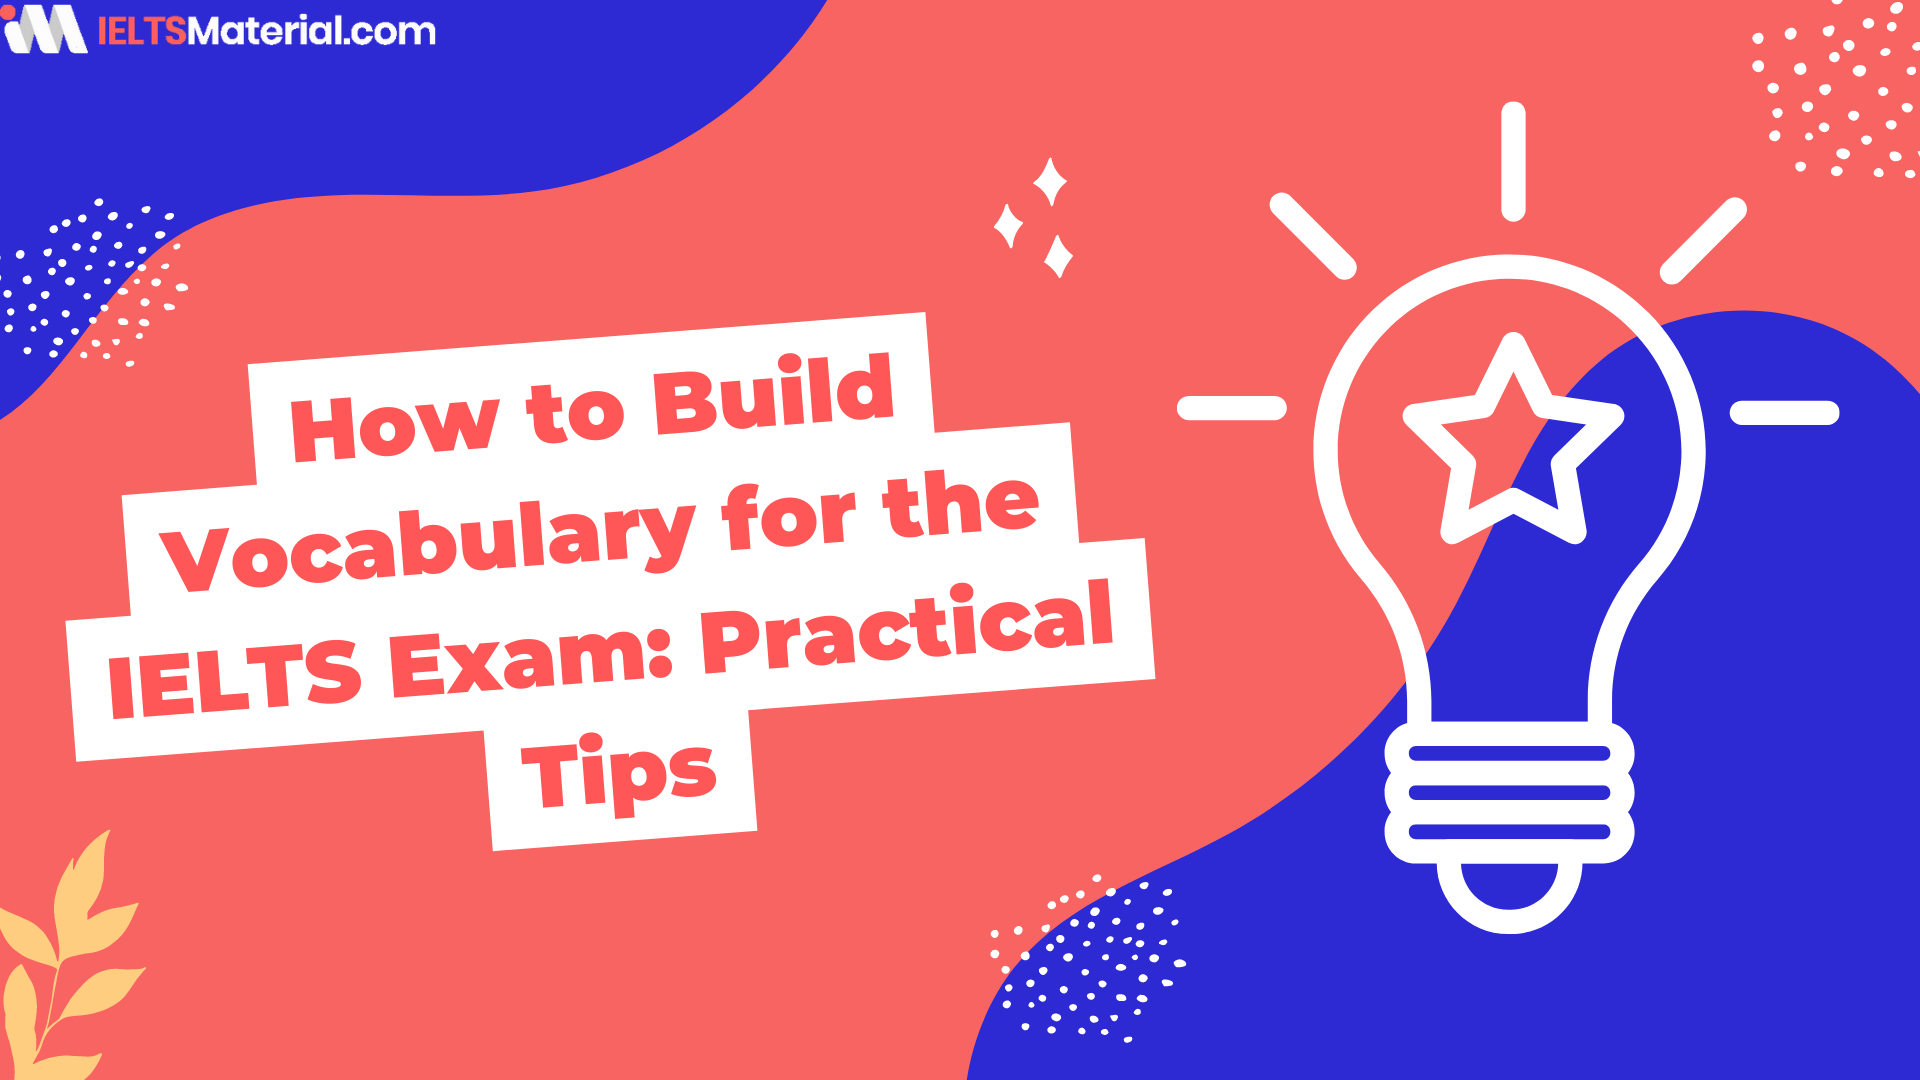 How to Build Vocabulary for the IELTS Exam: Practical Tips